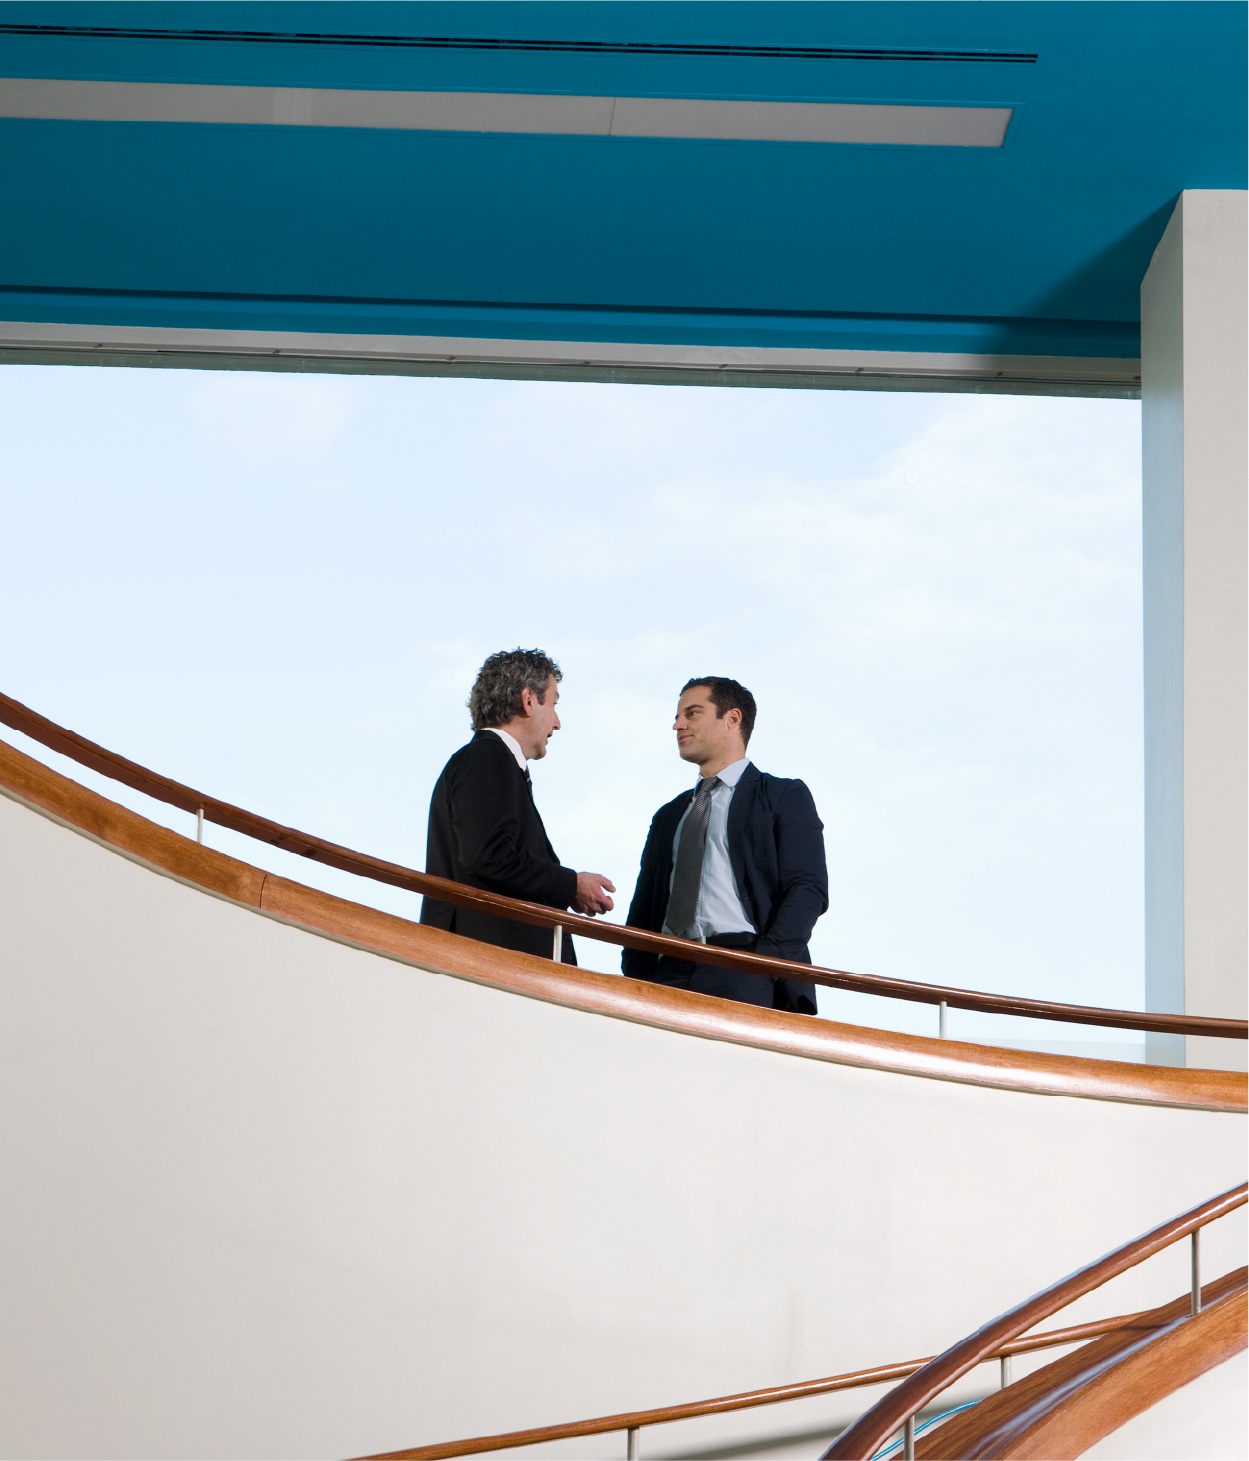 Two men in business suits chat on a balcony